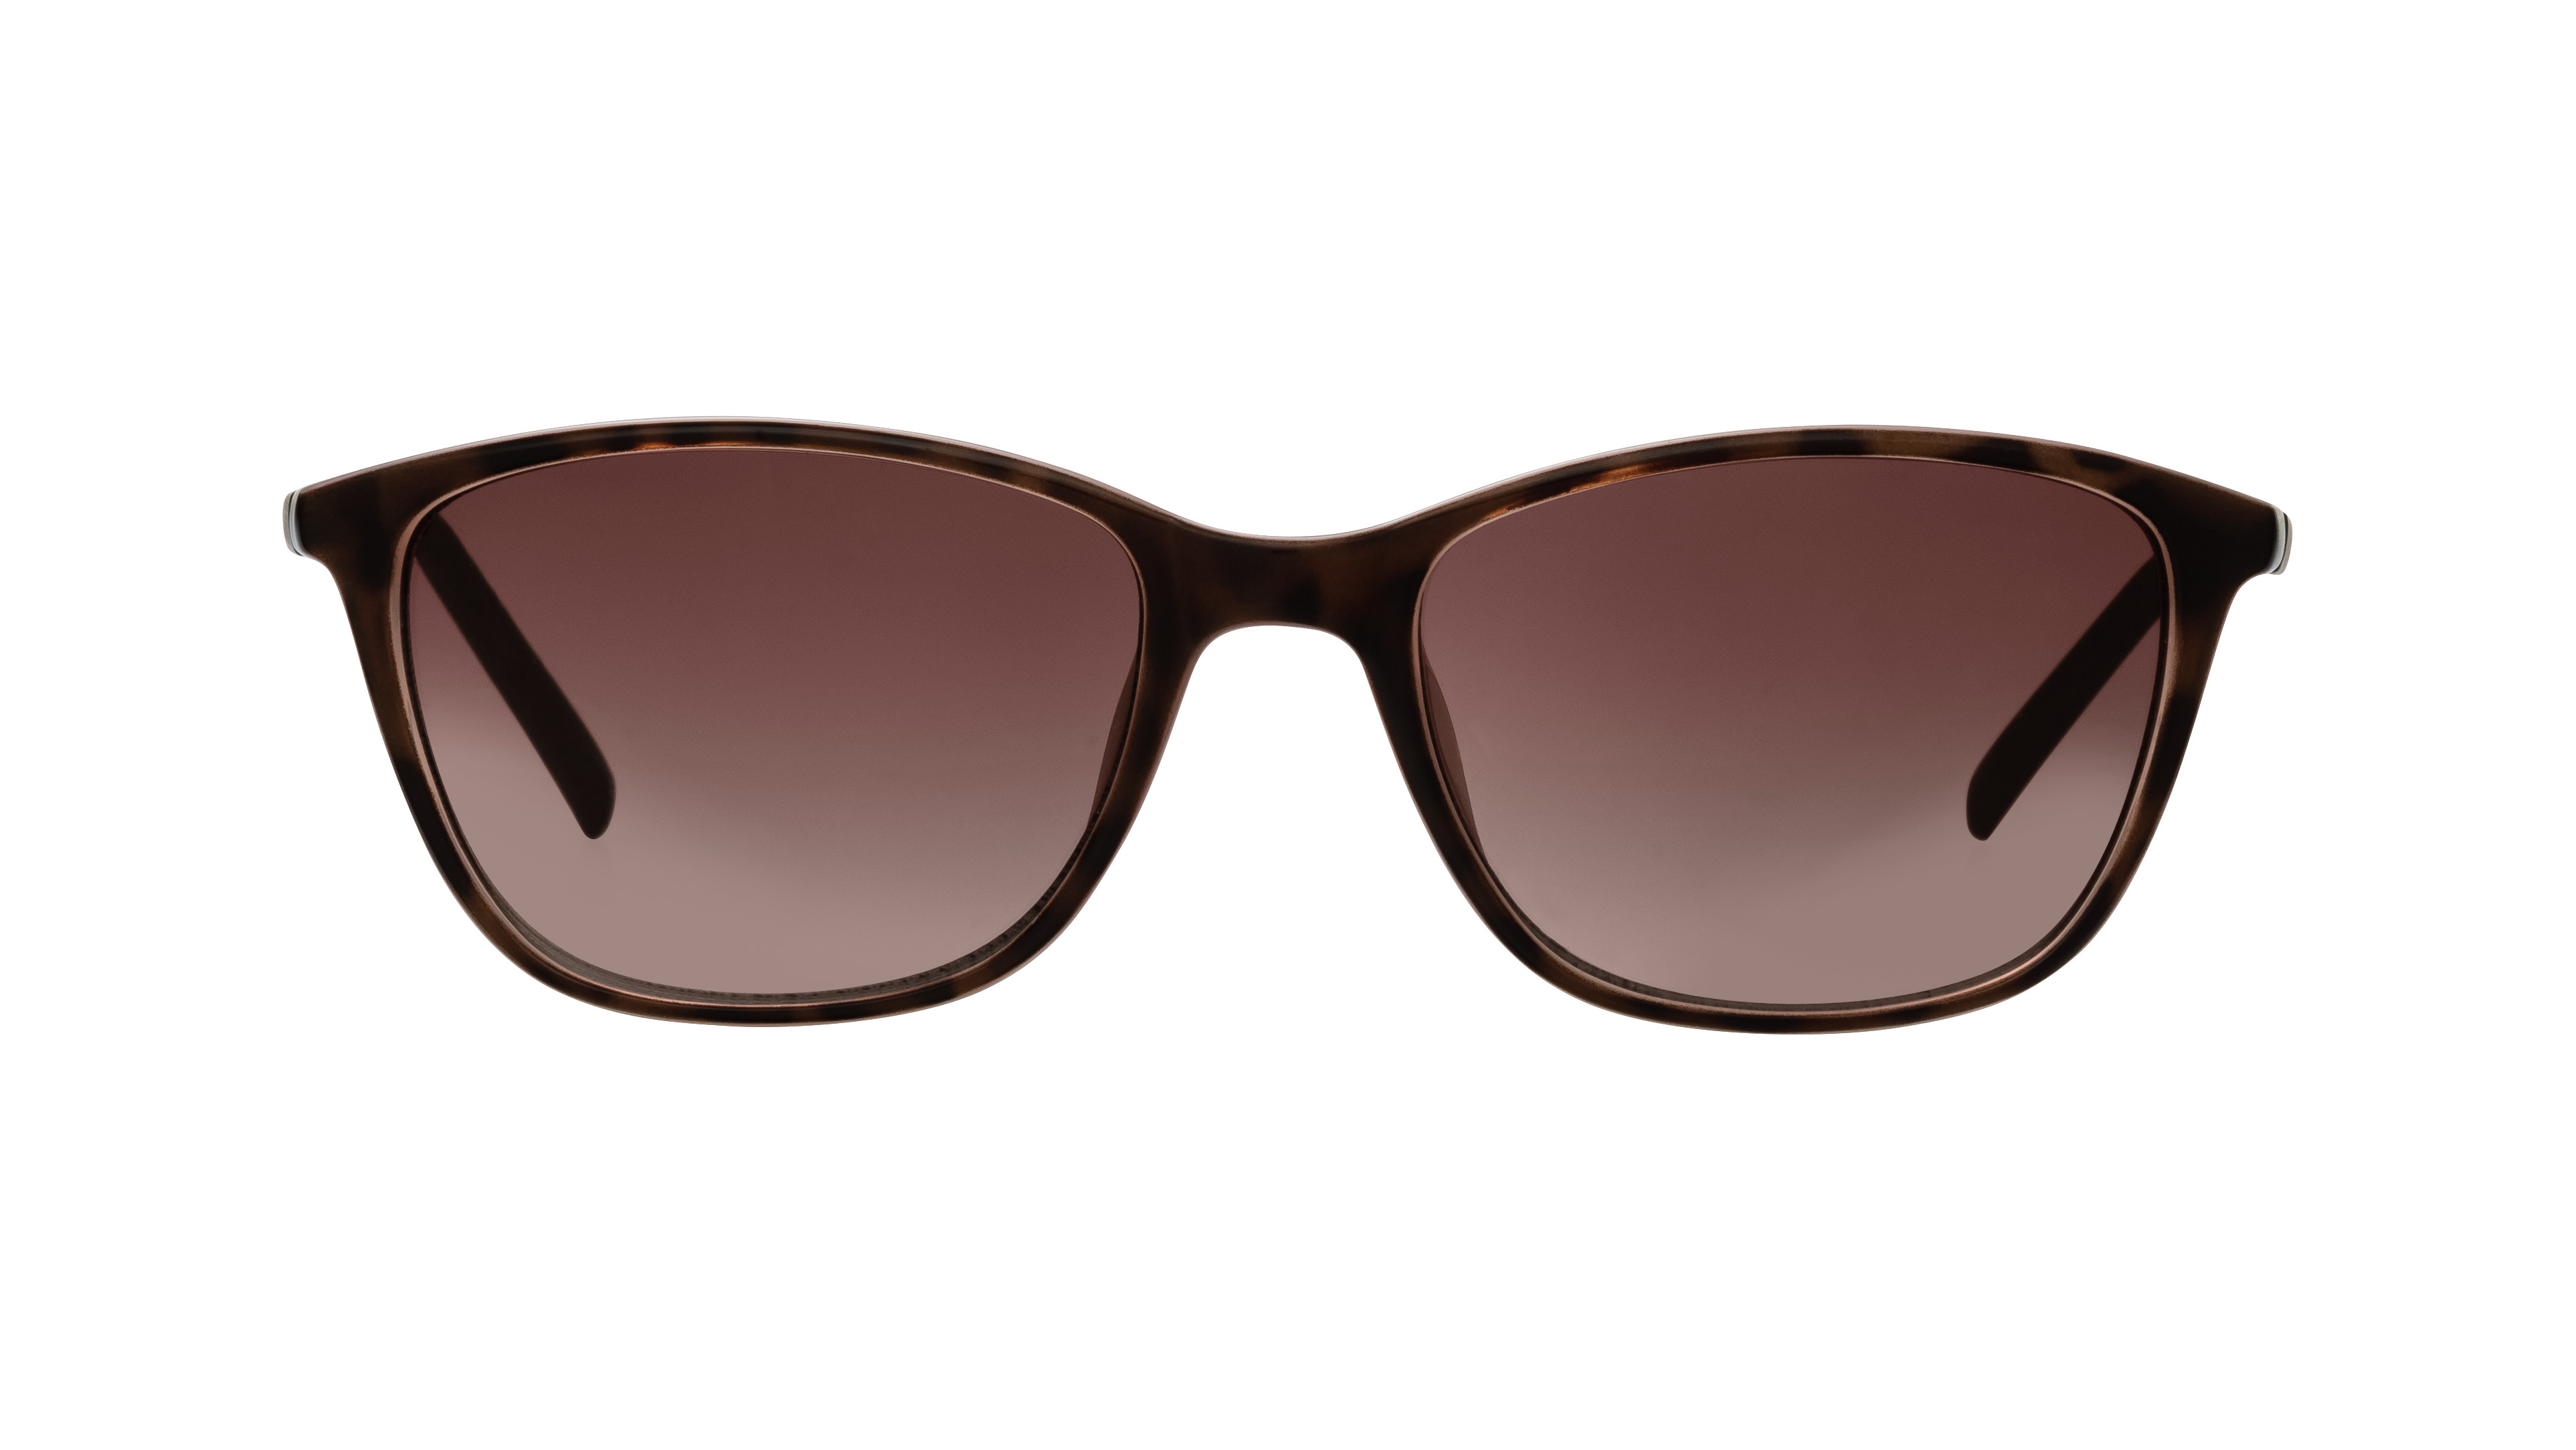 [products.image.front] HUMPHREY´S eyewear 584034 65 Sonnenbrille